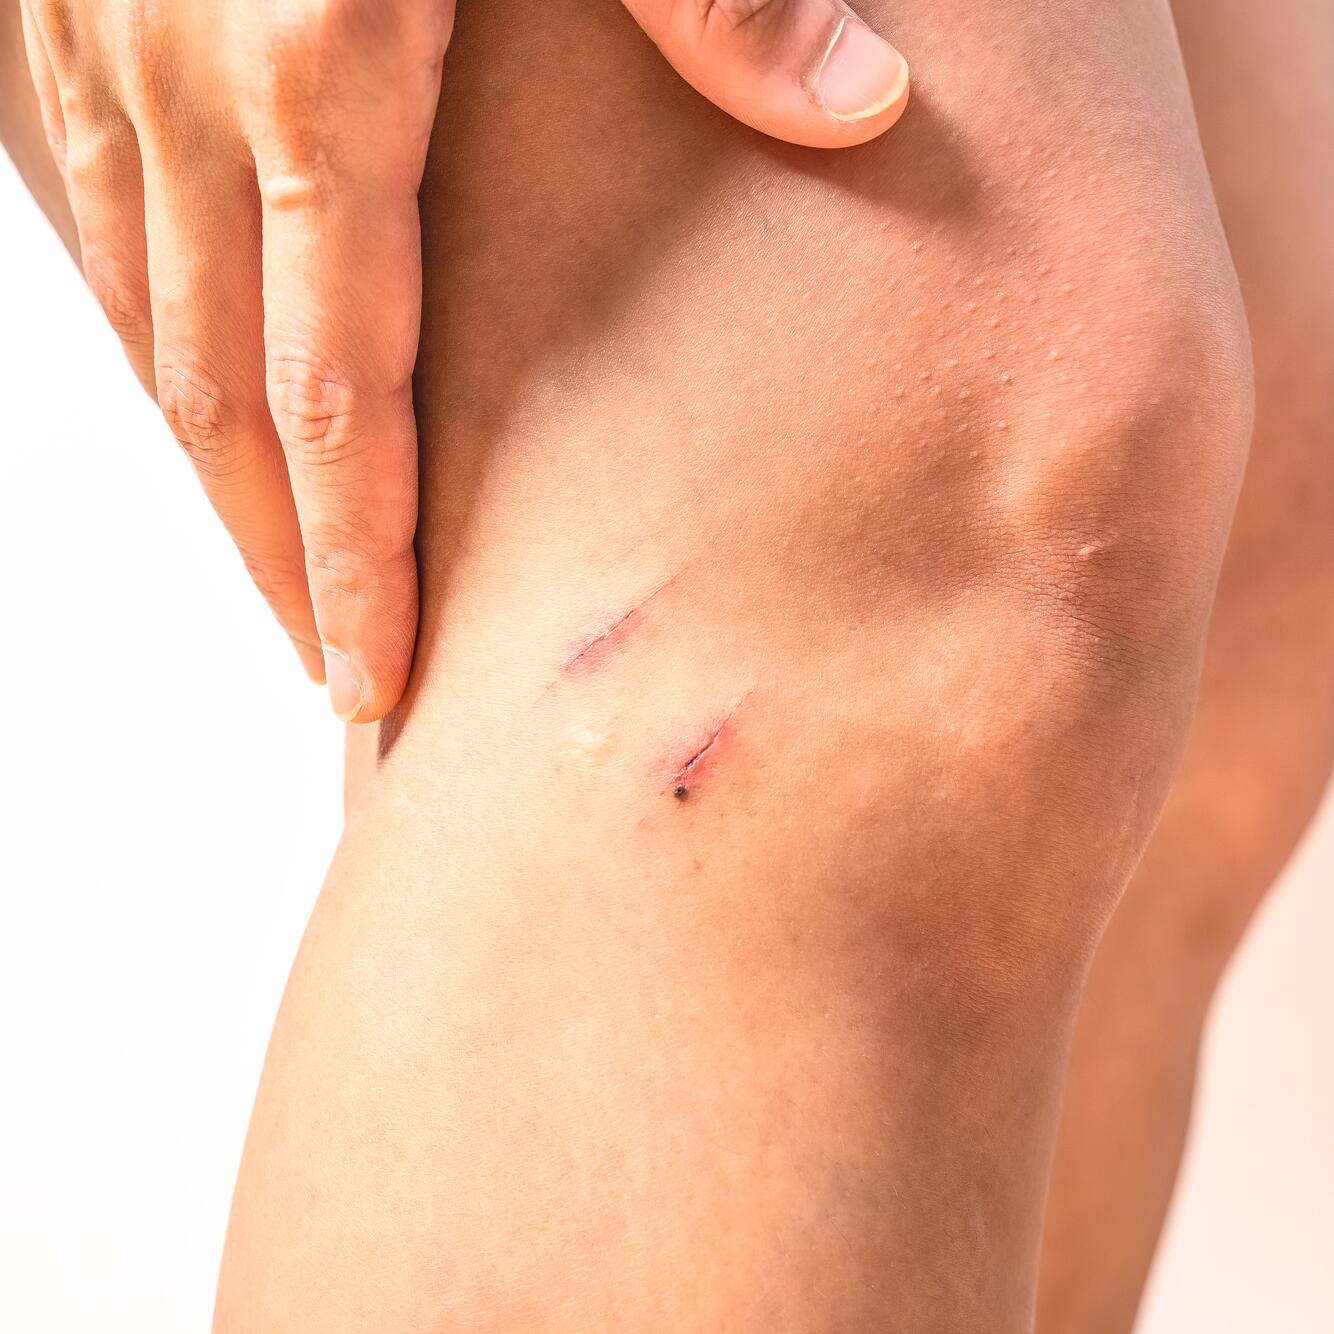 AD_SCARS_SCRATCH_KNEE_LARGE-1_2021